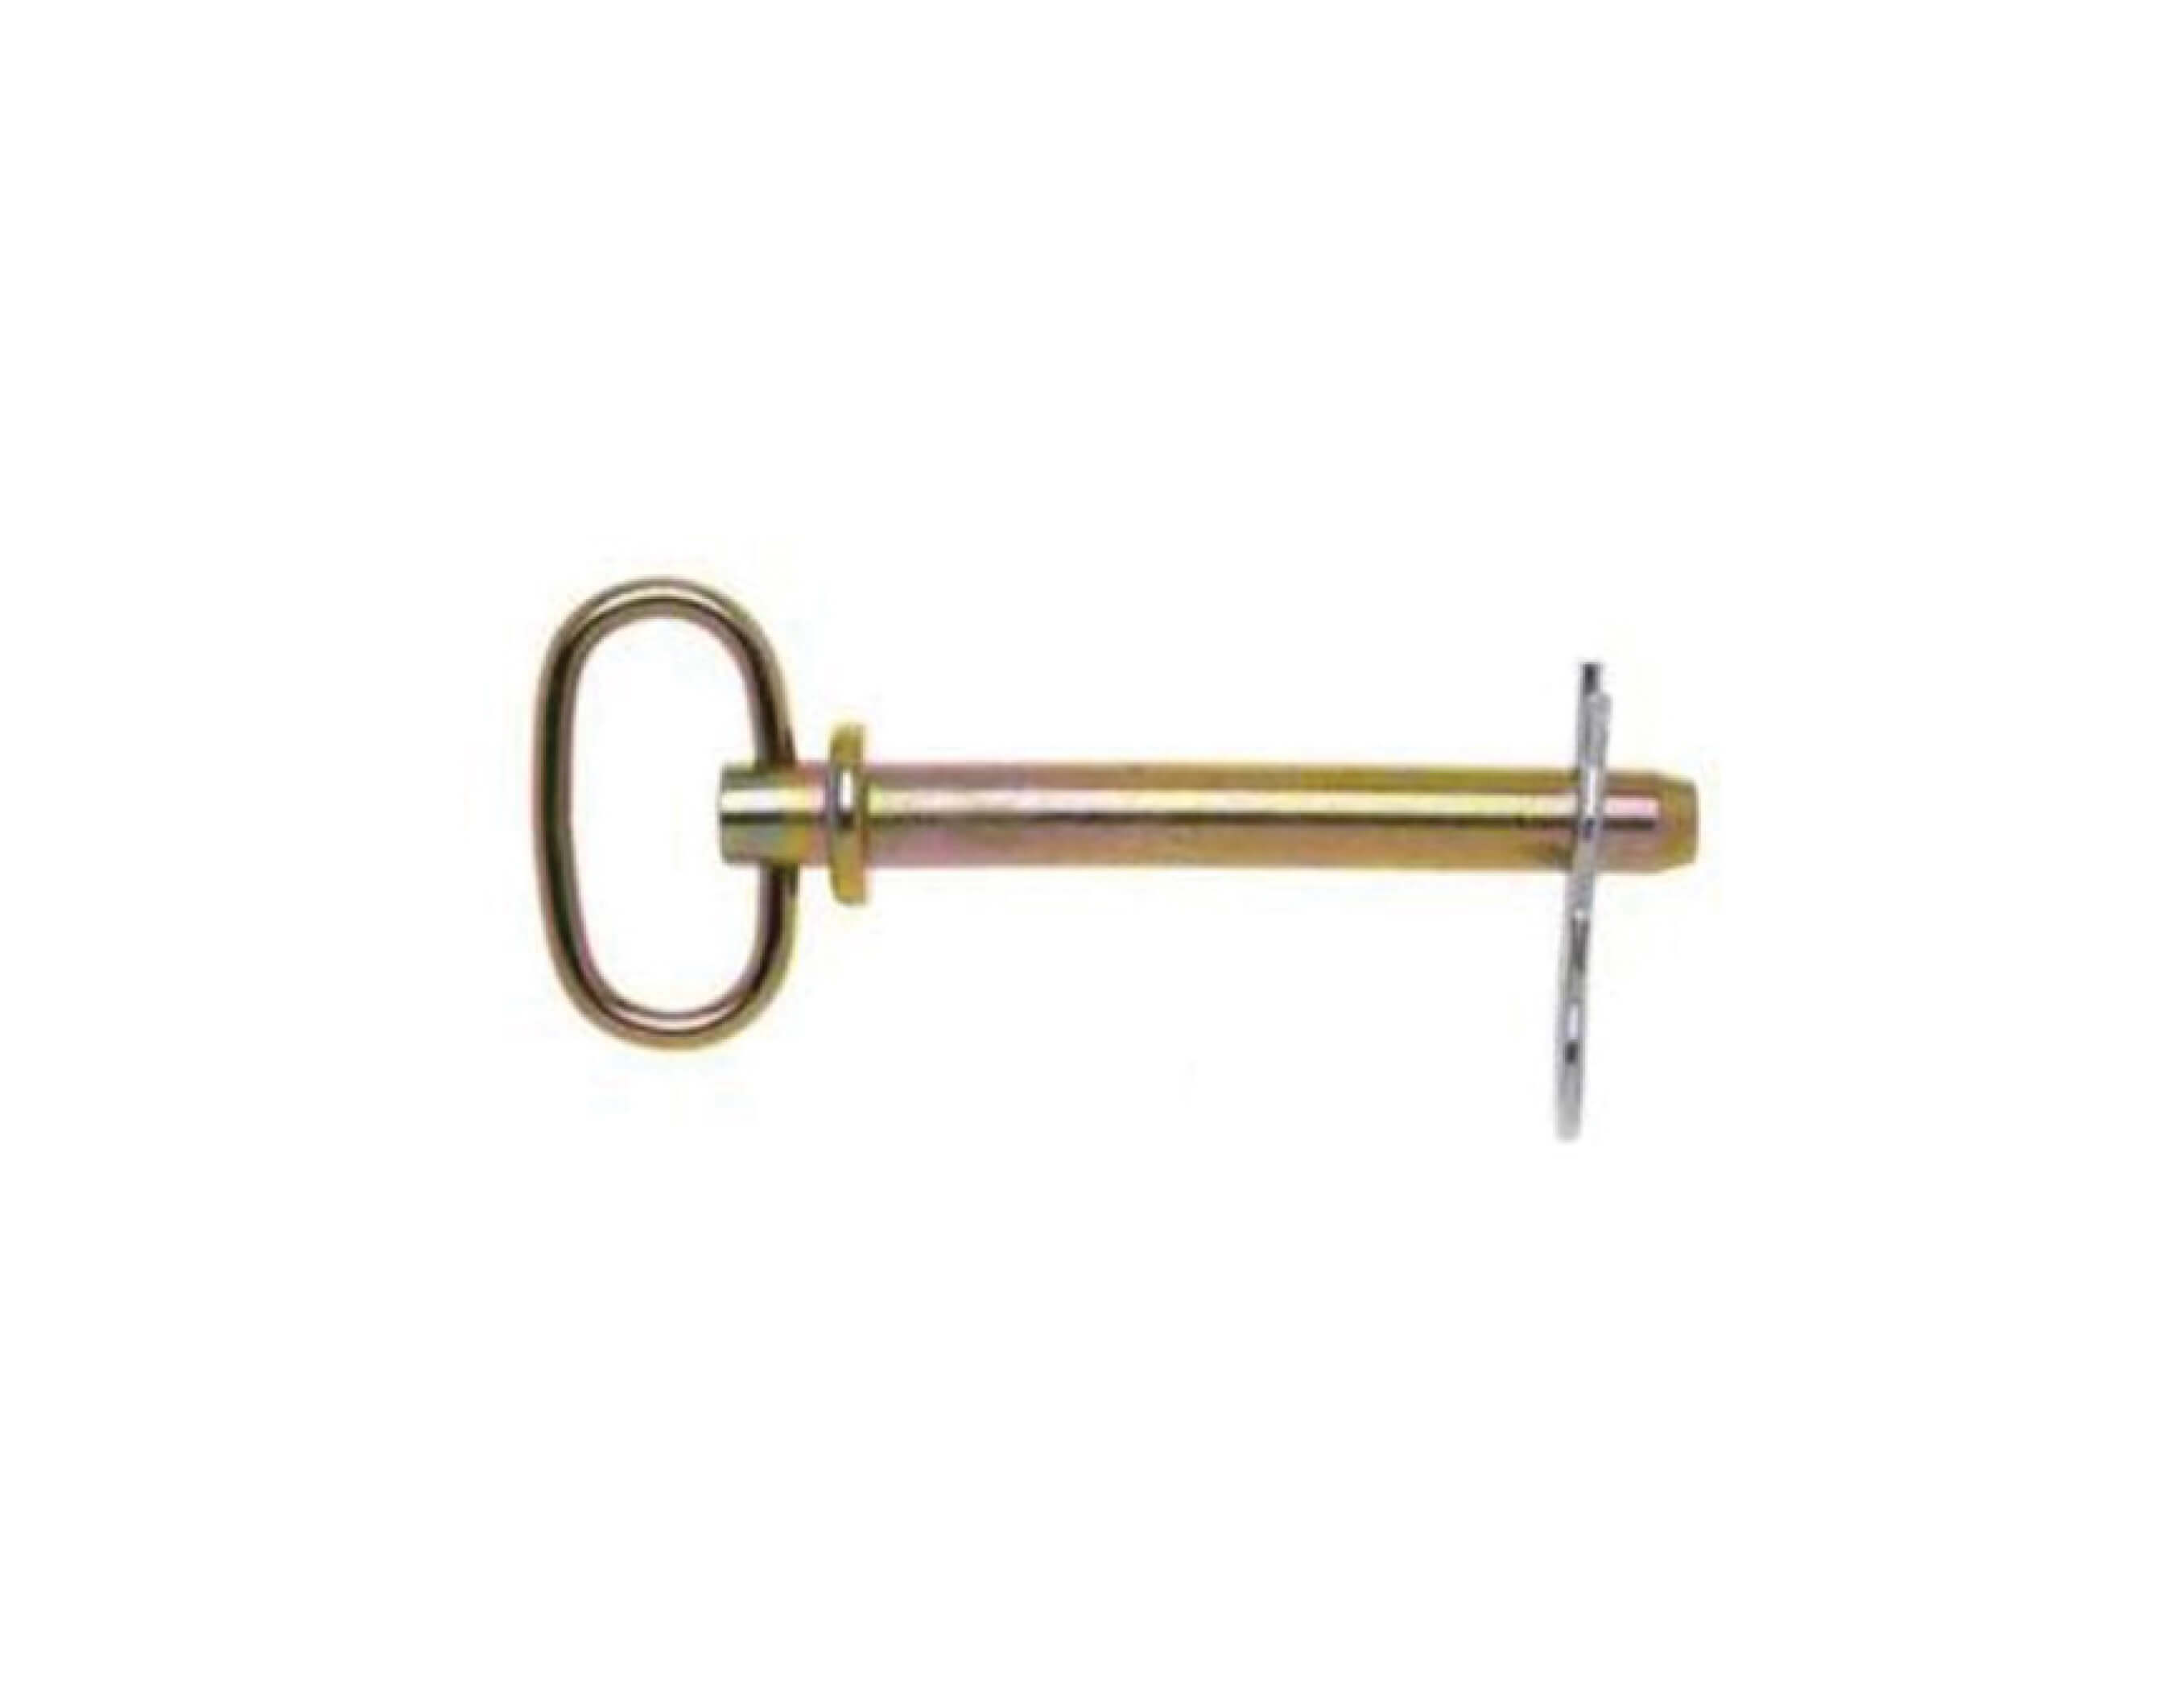 Hitch Pin with Clip 1/2 x 4-1/2